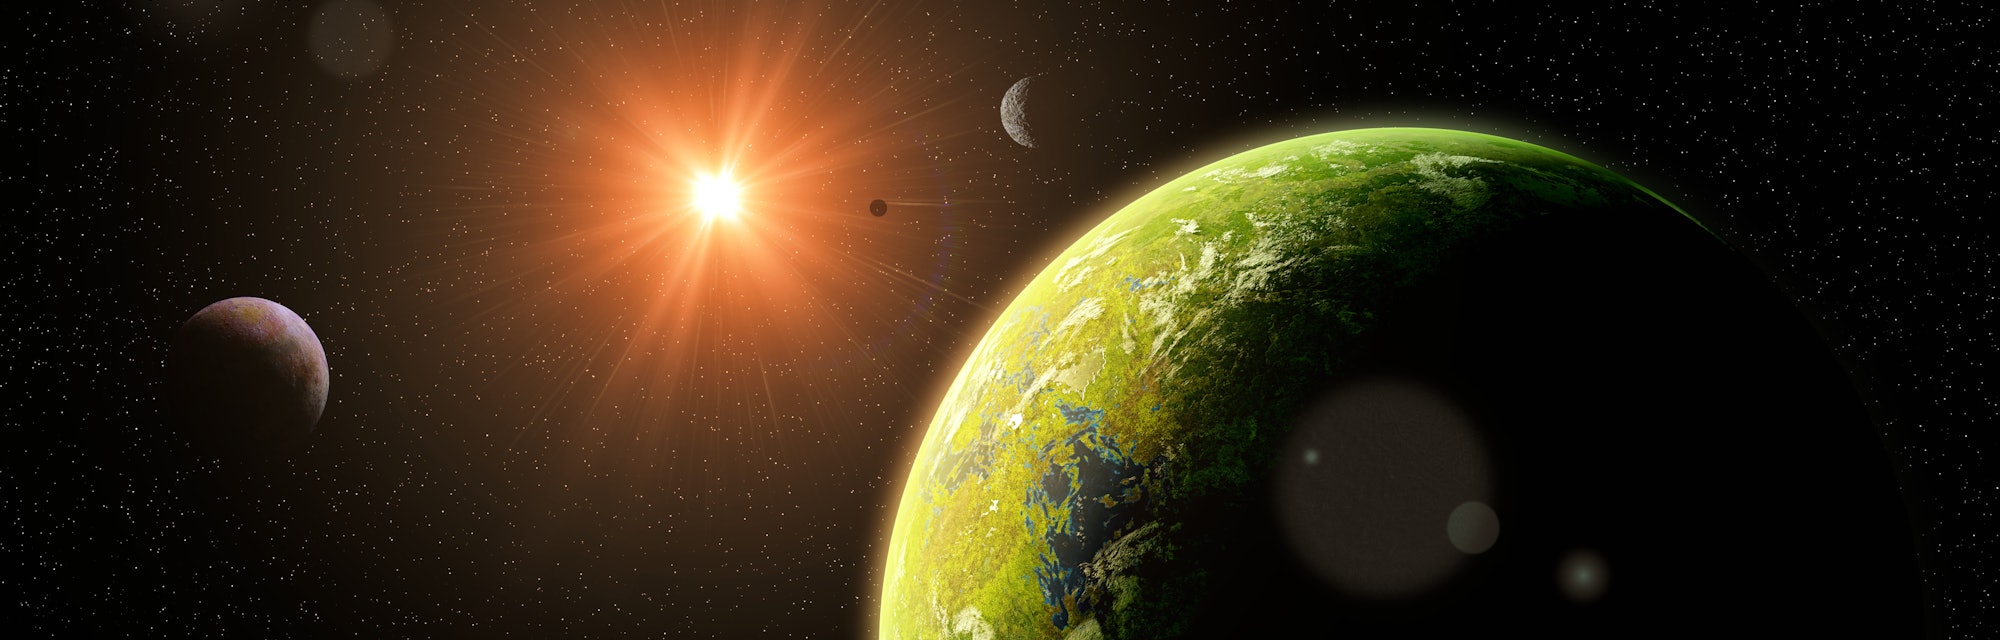 habitable alien world, exoplanets around a distant star, life on exotic planet (3d space illustratio...